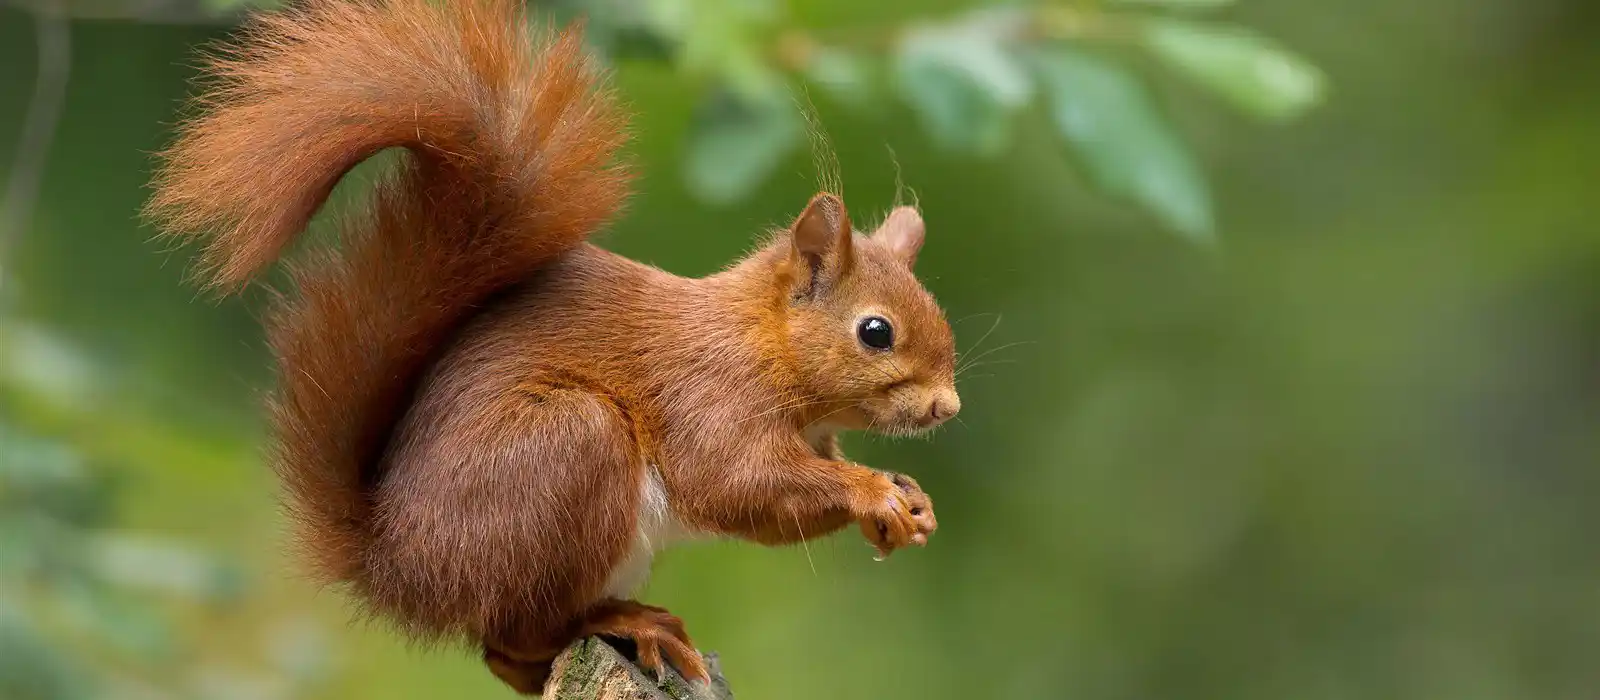 A delightful red squirrel in the UK